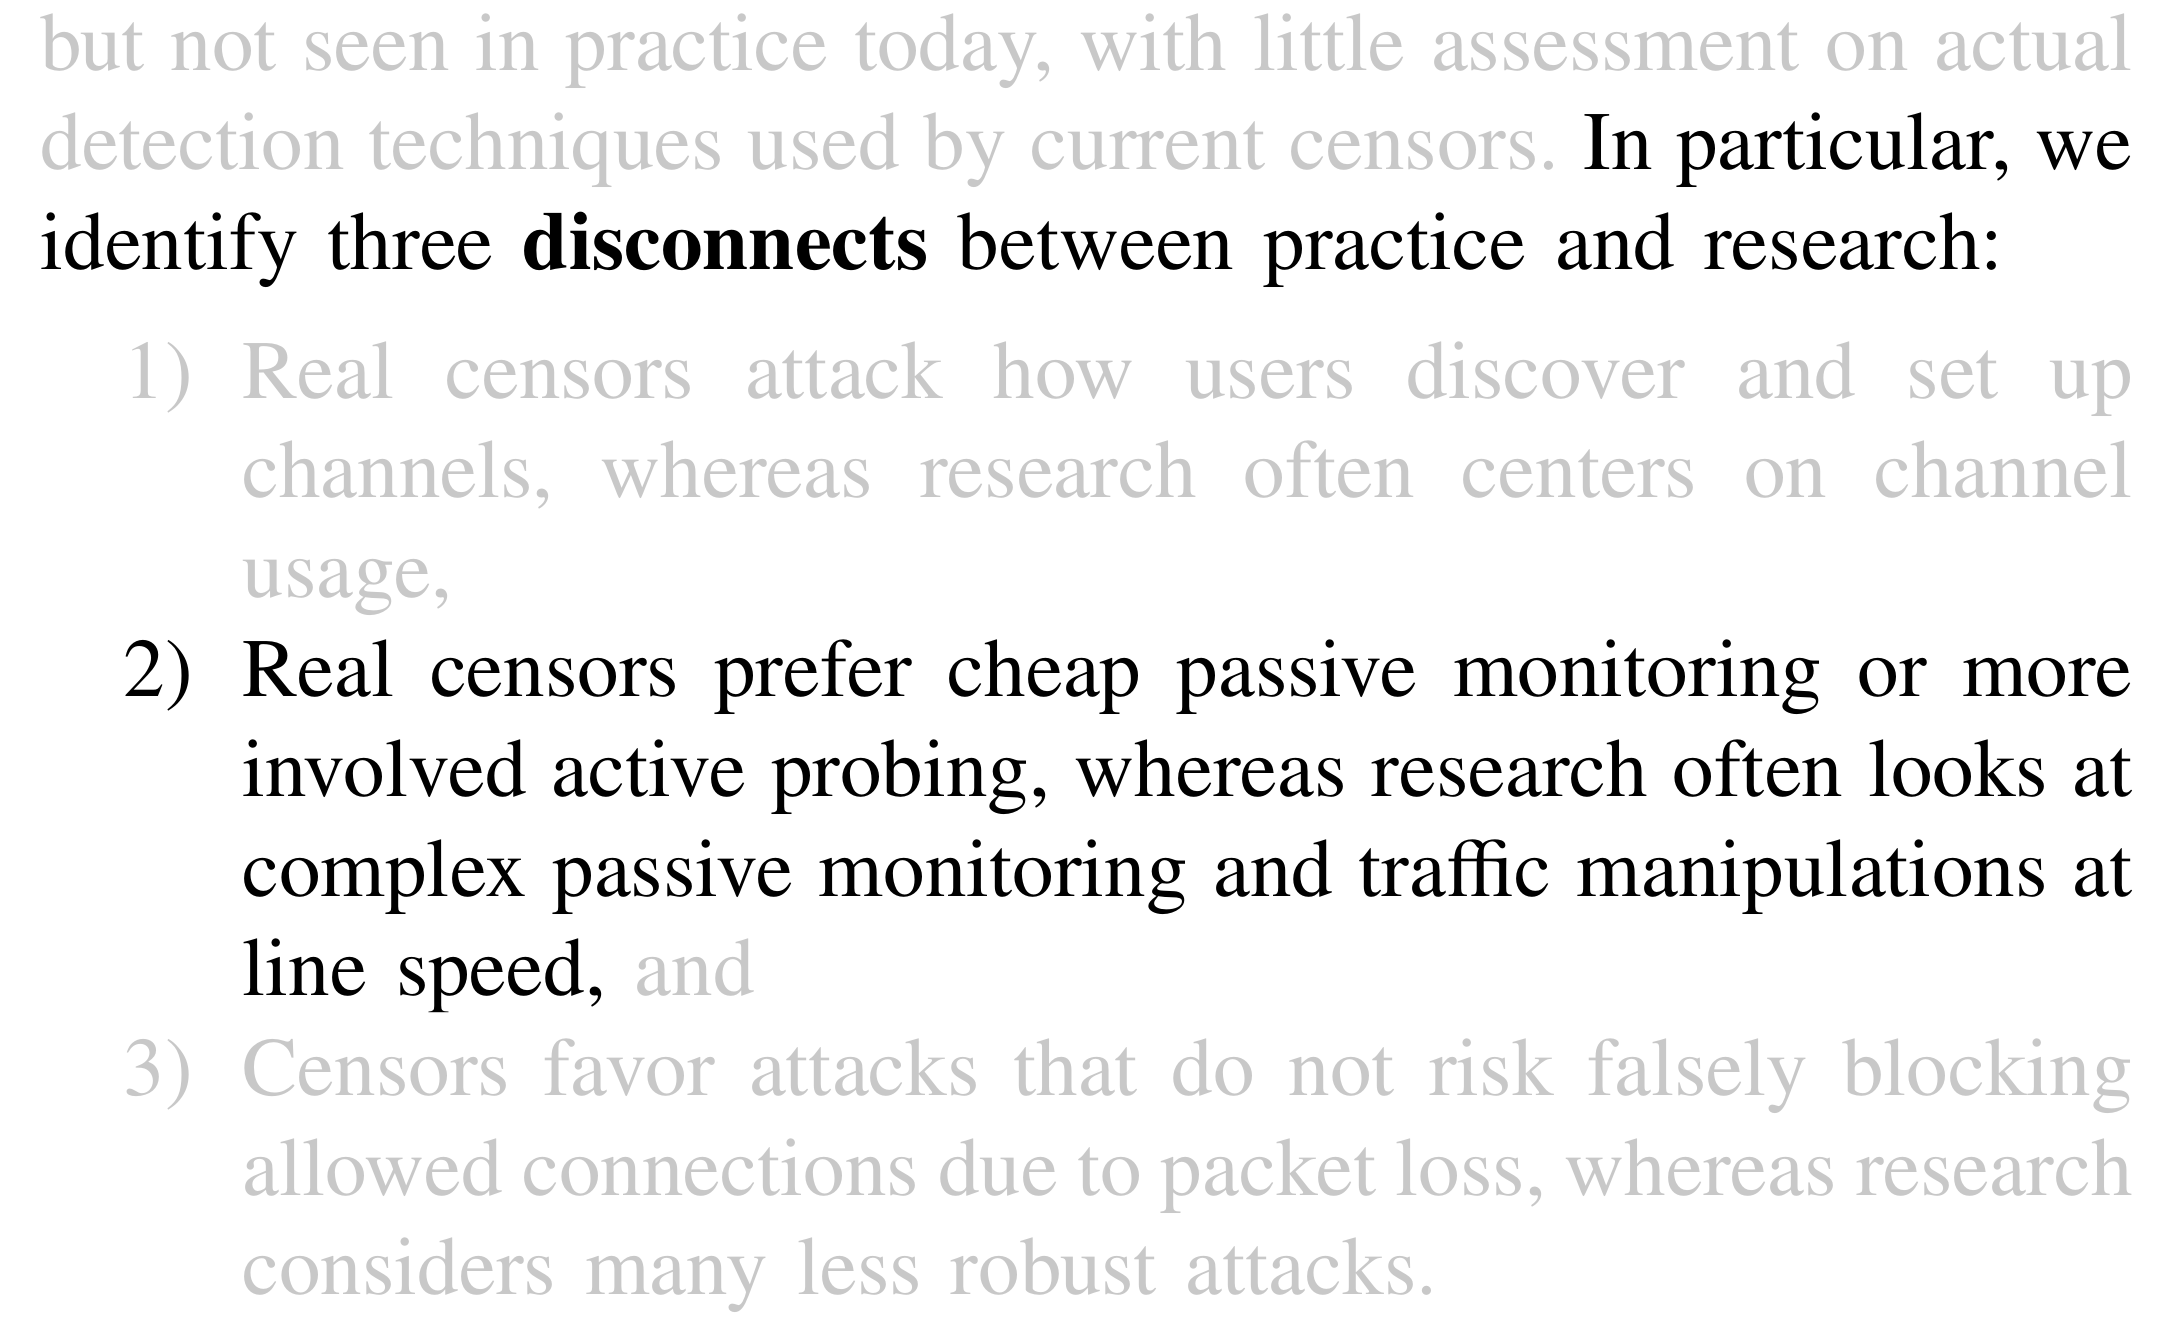 In particular, we identify three disconnects between practice and research: 1) Real censors attack how users discover and set up channels, whereas research often centers on channel usage, 2) Real censors prefer cheap passive monitoring or more involved active probing, whereas research often looks at complex passive monitoring and traffic manipulations at line speed, and 3) Censors favor attacks that do not risk falsely blocking allowed connections due to packet loss, whereas research considers many less robust attacks.